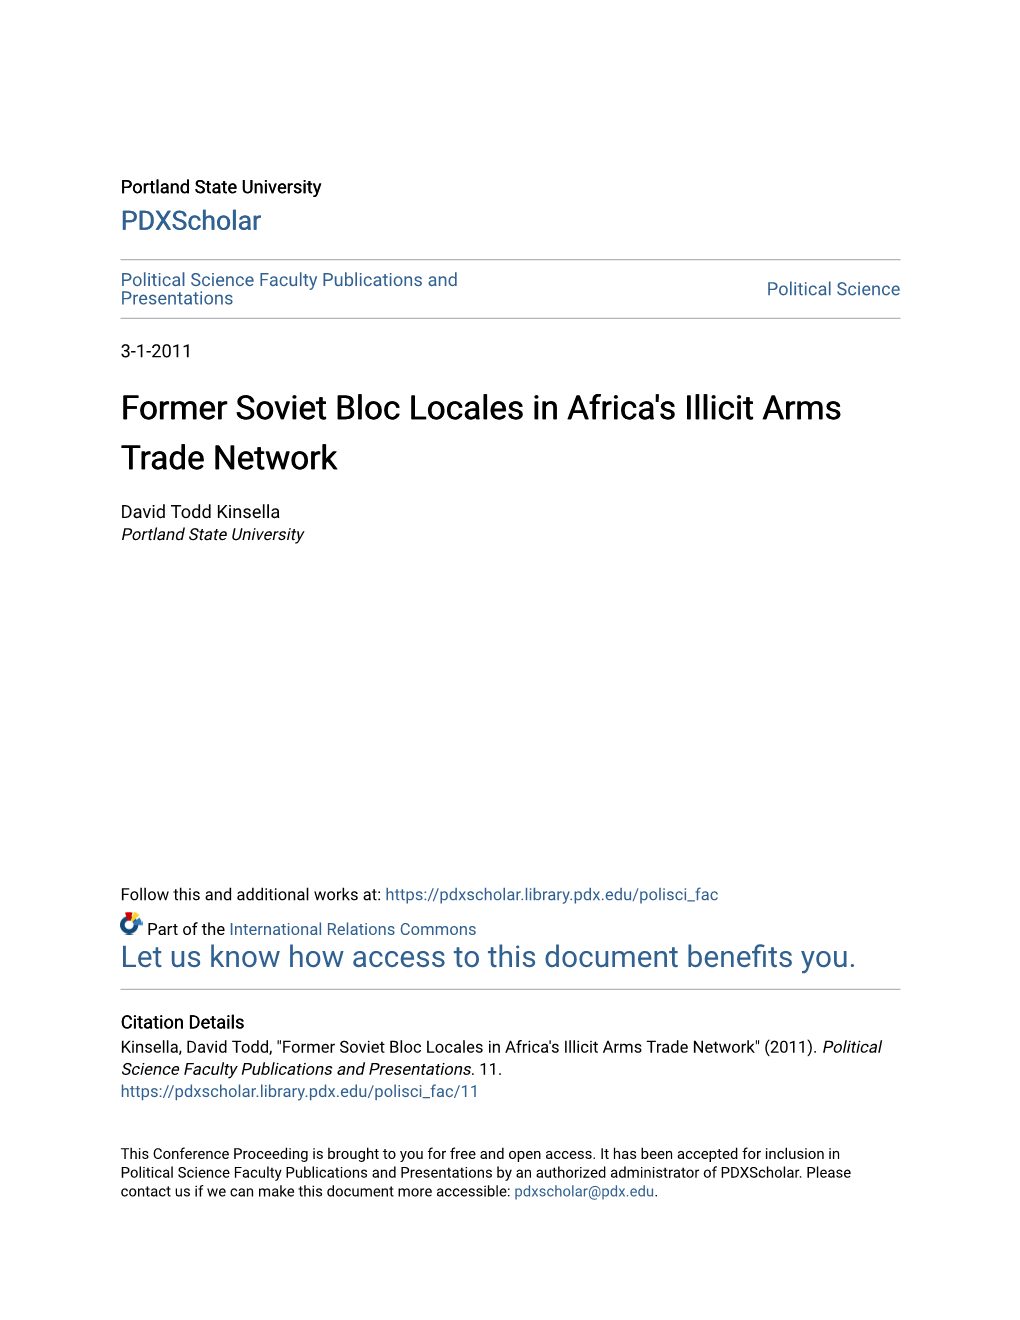 Former Soviet Bloc Locales in Africa's Illicit Arms Trade Network